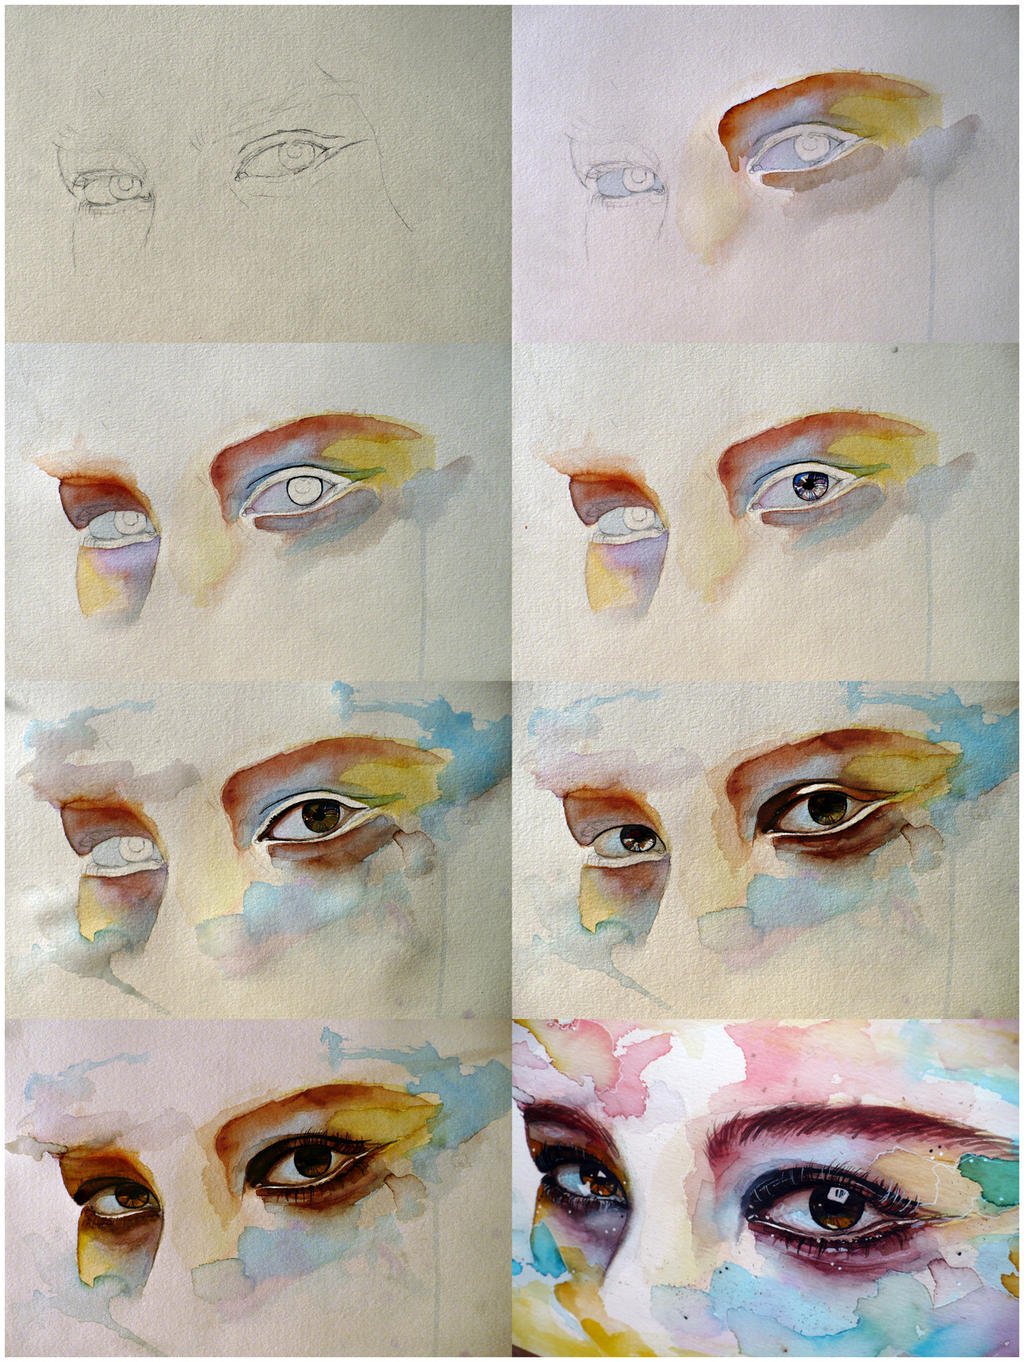 Watercolor eye study, step by step